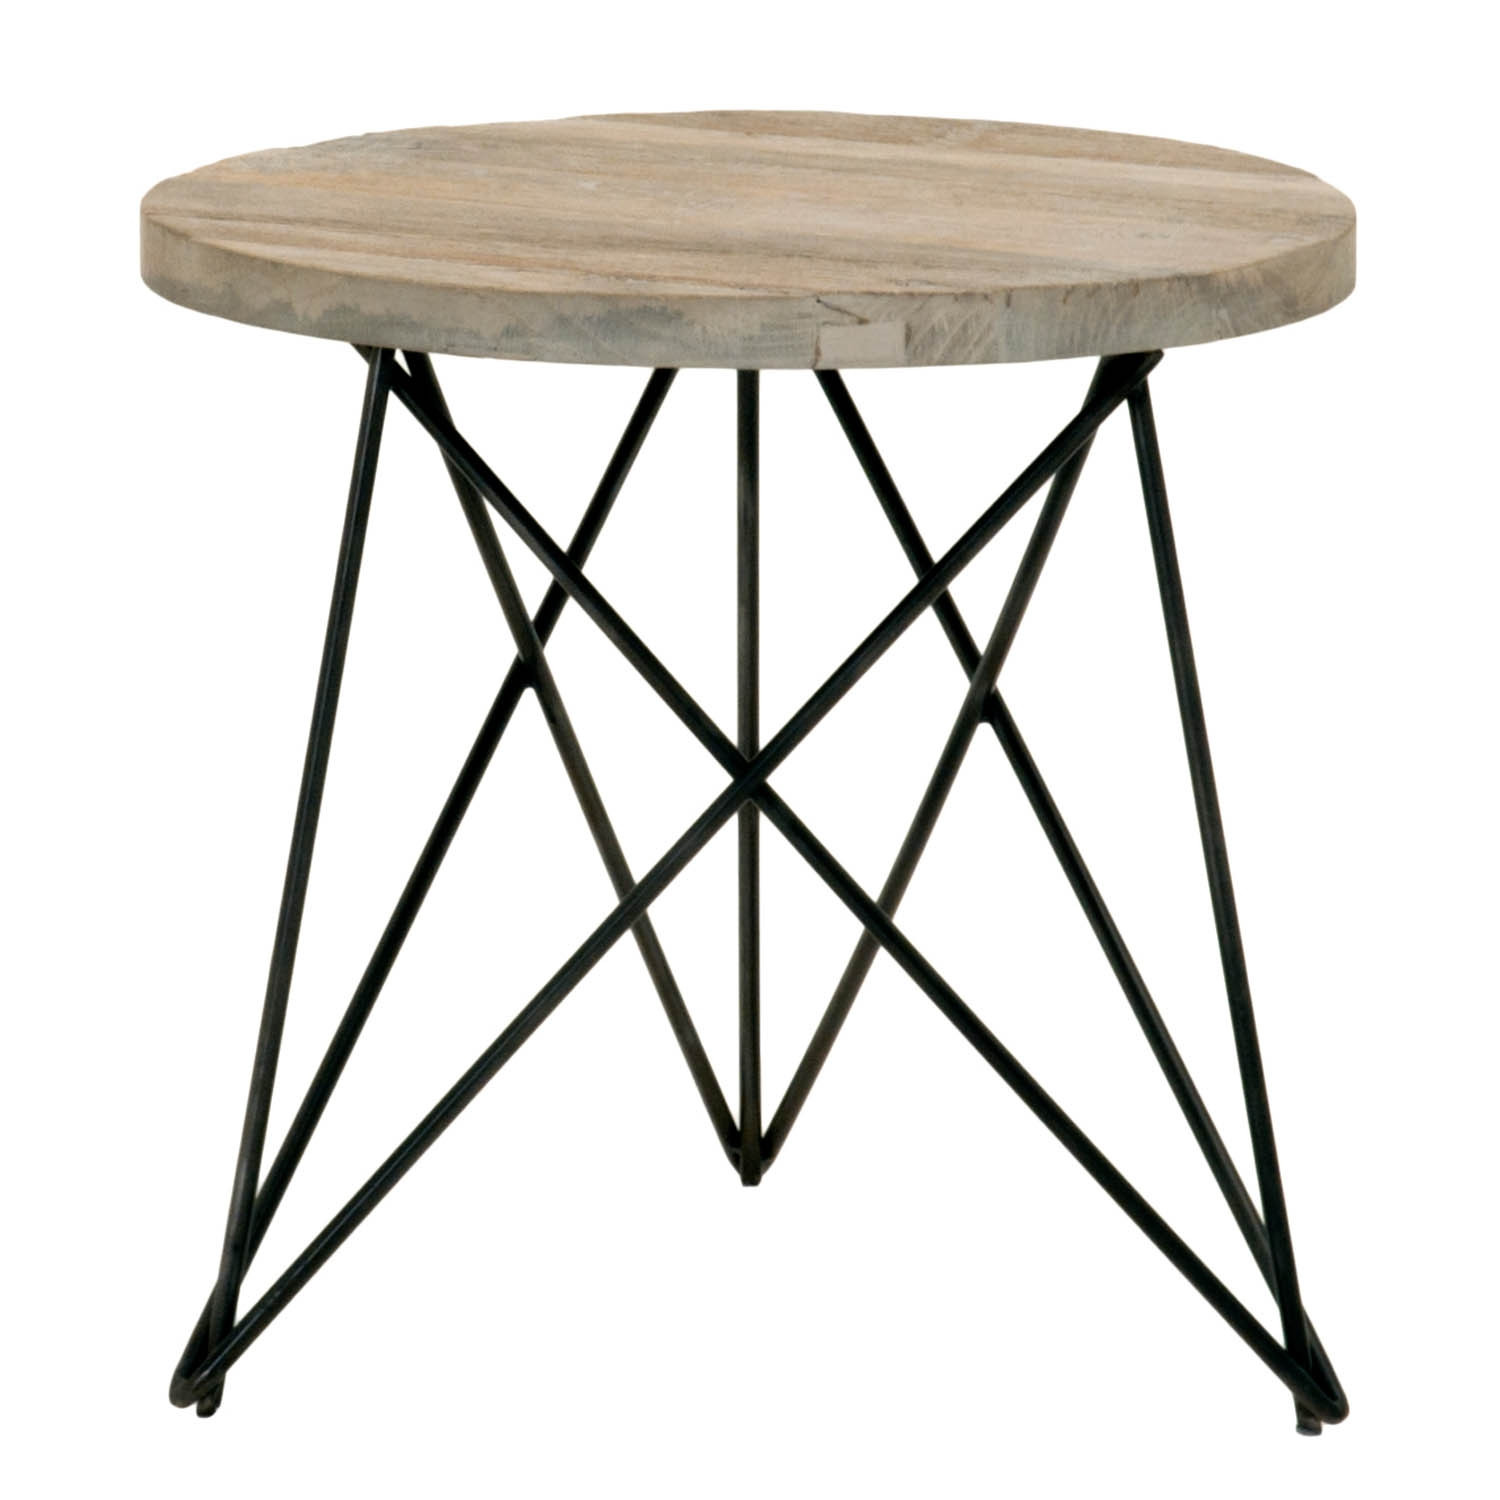 katherine accent table furniture canvas smoke gray from belleand outdoor nesting tables bar height cocktail matching nightstands large top ideas with usb ports black round cloths